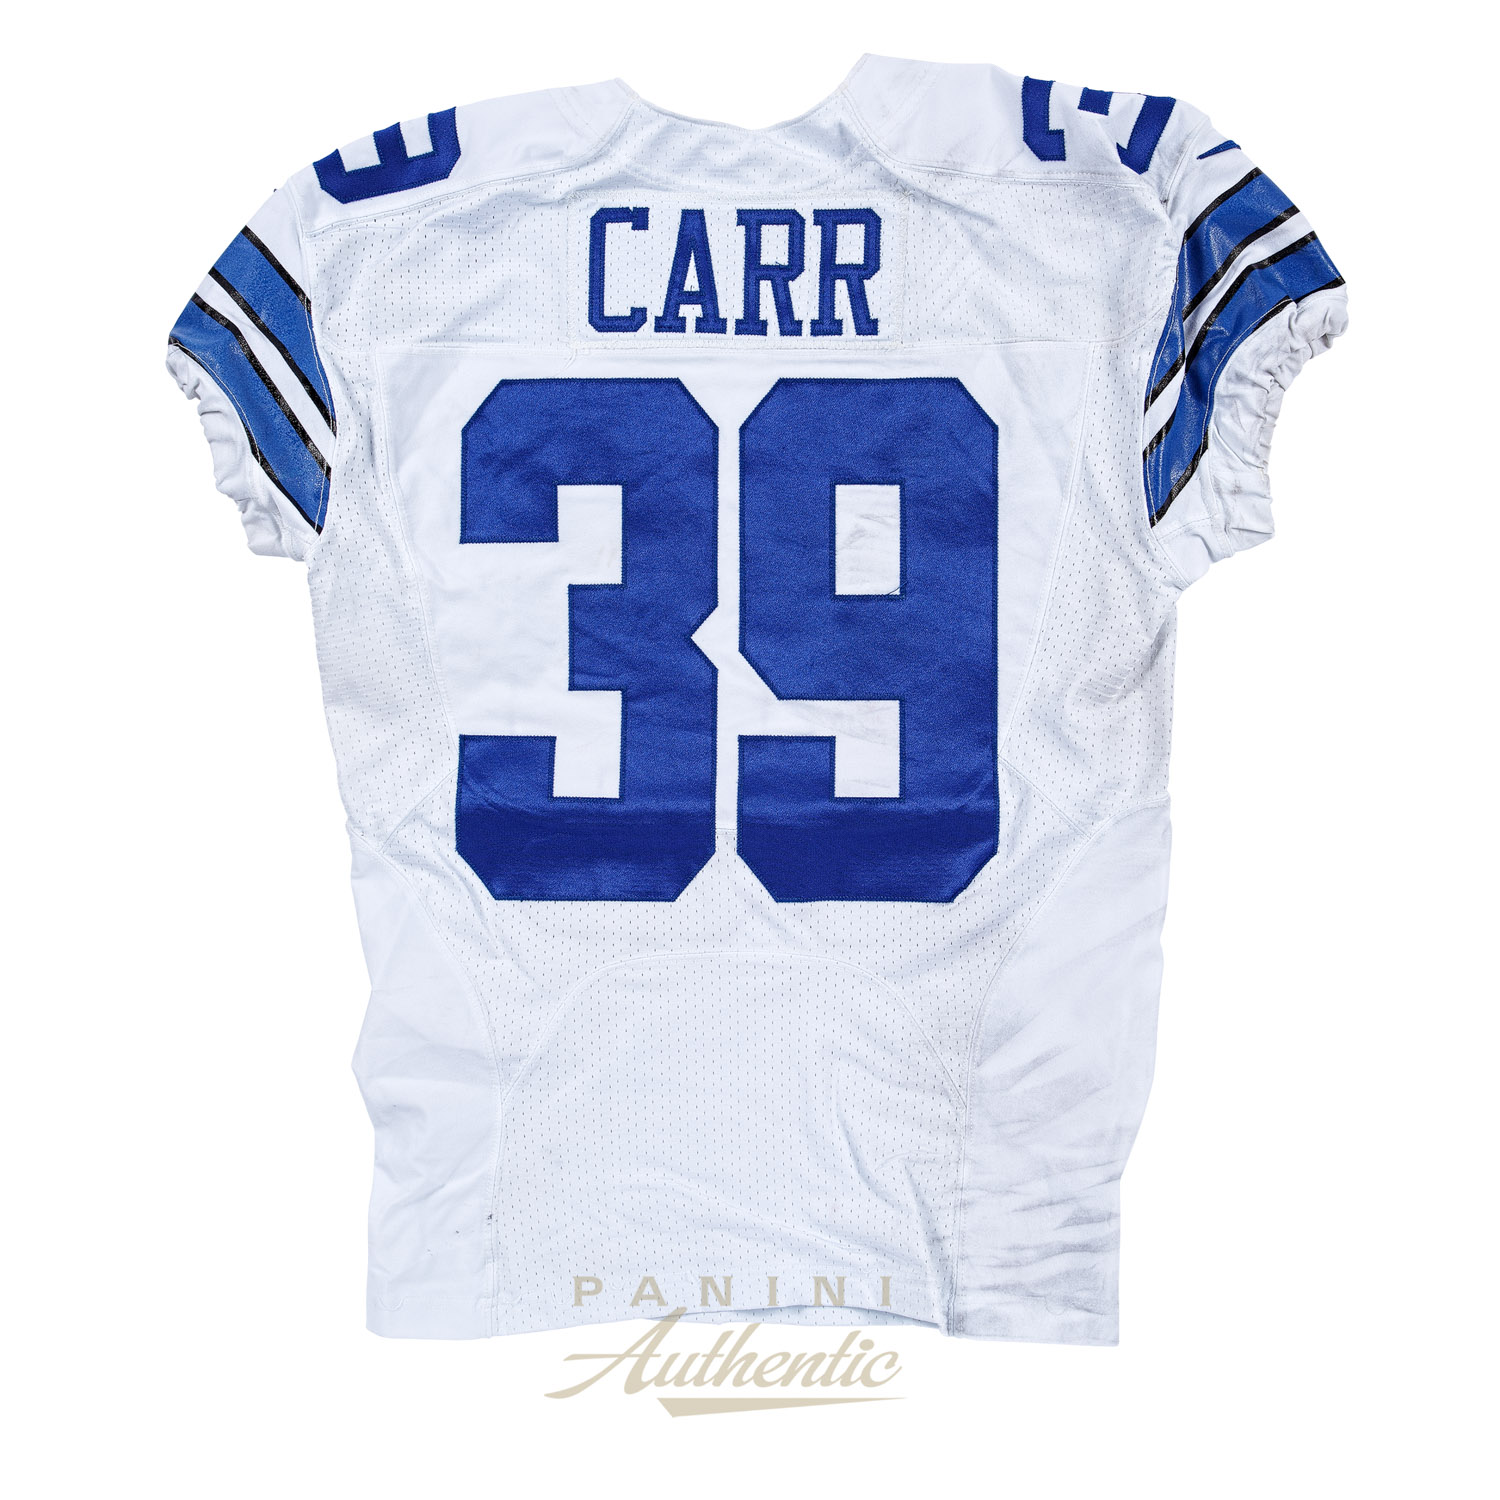 carr jersey